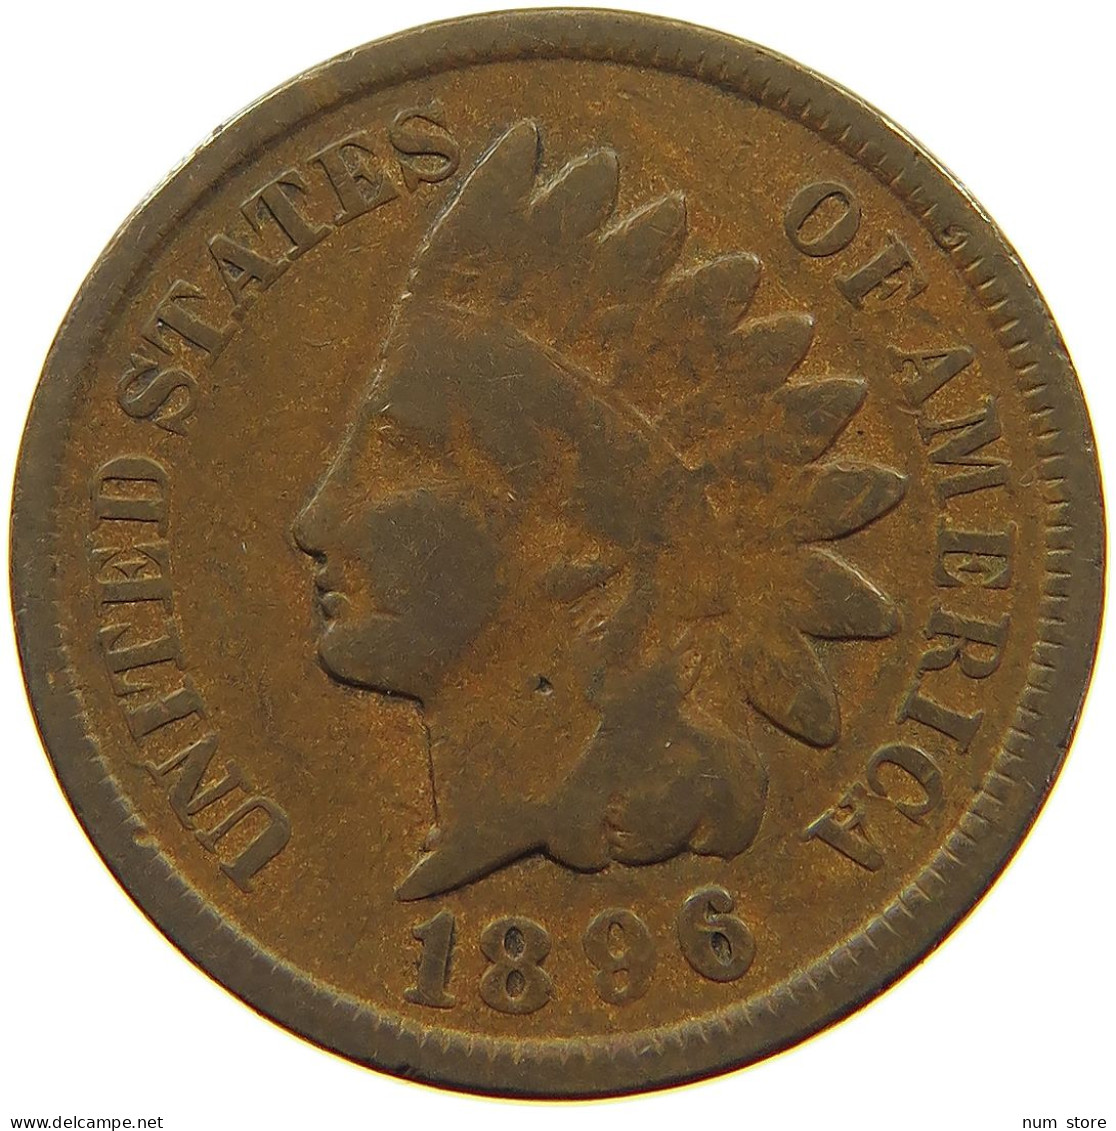 UNITED STATES OF AMERICA CENT 1896 INDIAN HEAD #s063 0393 - 1859-1909: Indian Head